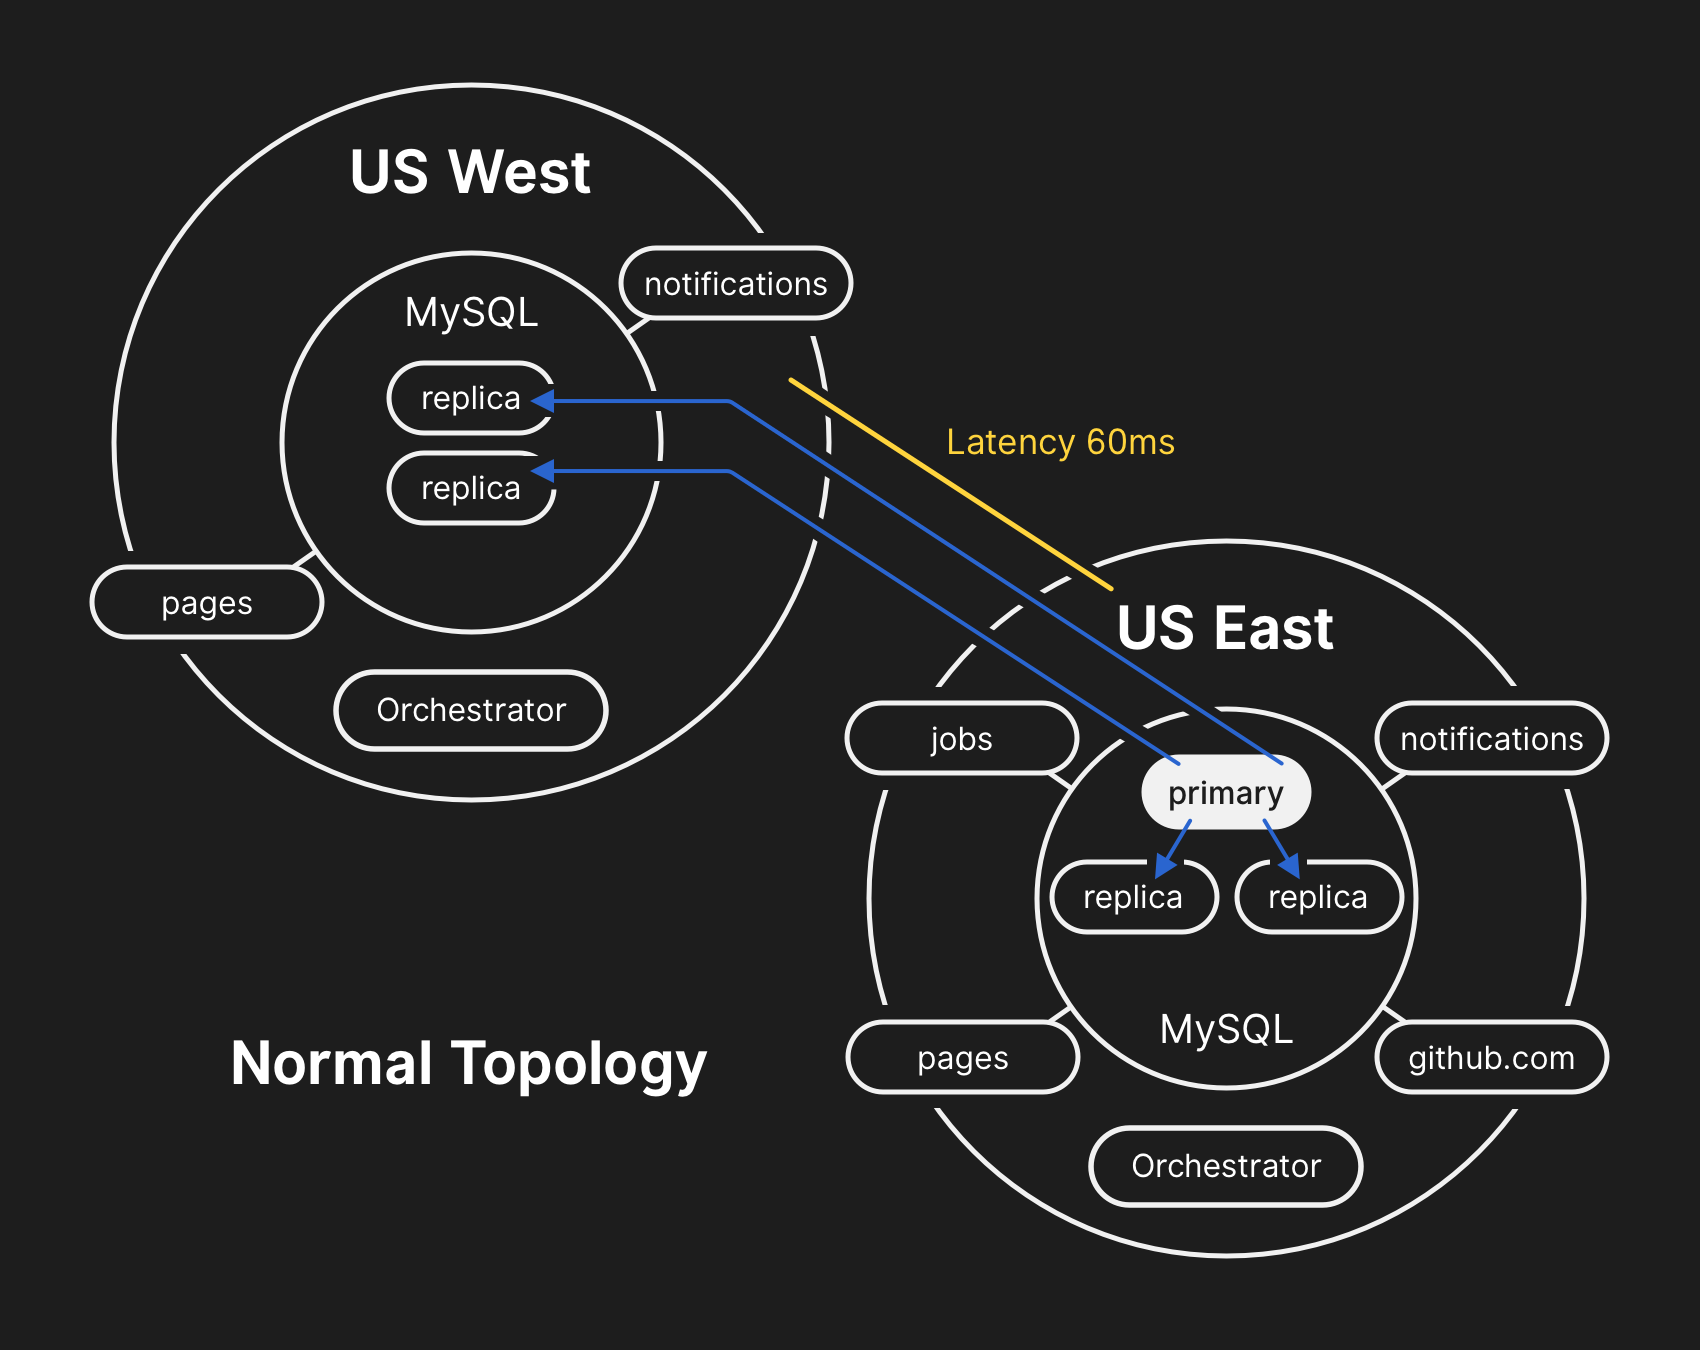 In the normal topology, all apps perform reads locally with low latency.